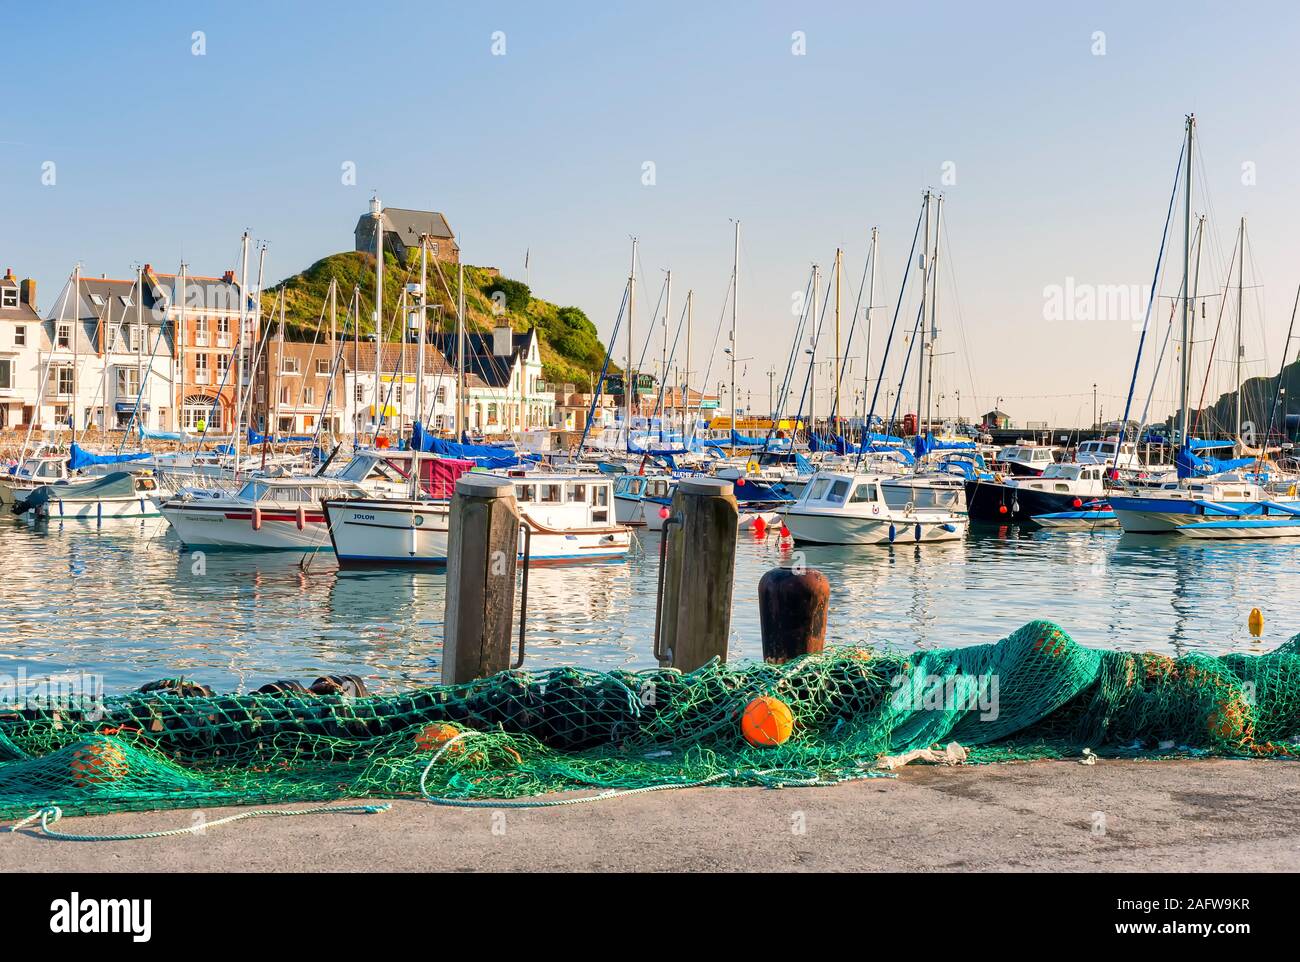 Ilfracombe Harbour with fishing nets on the side with yachts boats and fishing boats in the harbour with views to St Nicholas Chapel on Lantern Hill Stock Photo